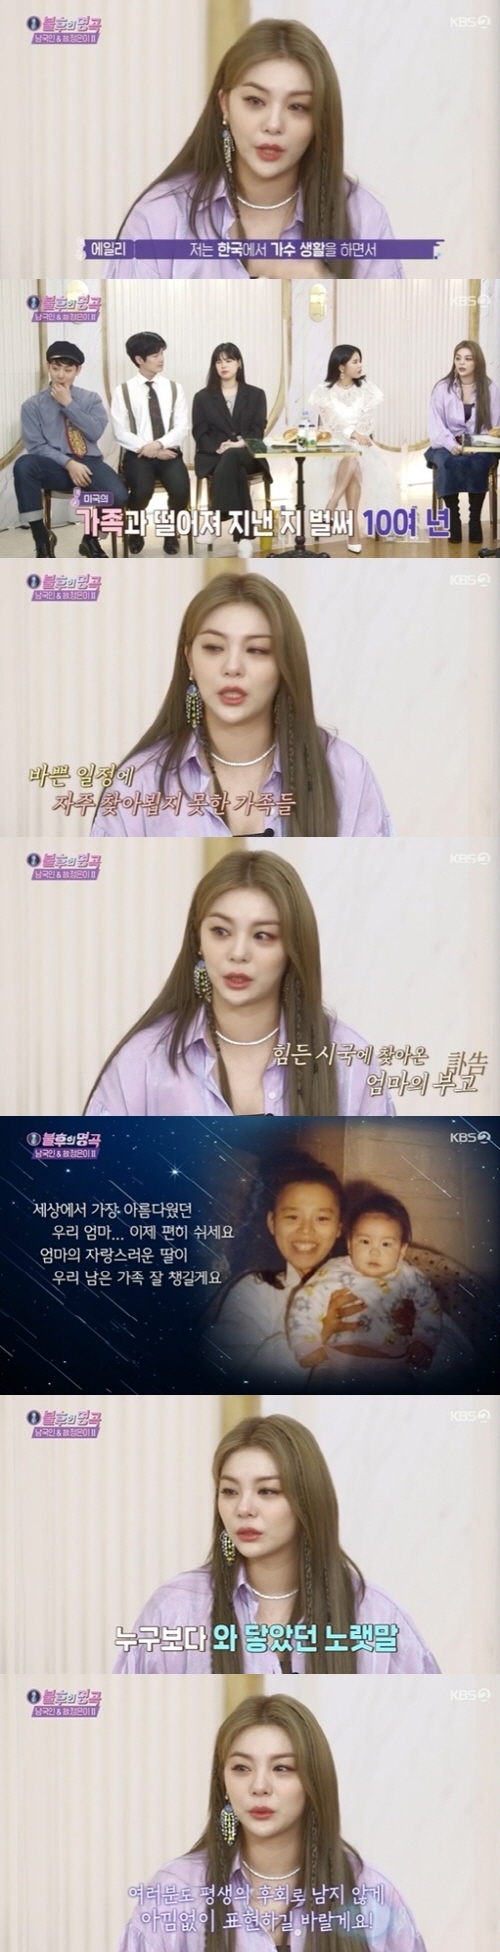 Ailee appeared on the second part of KBS 2TV Immortal Songs: Singing the Legend The Couple Composer, Lyricist, South Korean & Late Jung Eun, which was broadcast on the 2nd.Ailee made her first appearance on Immortal Songs: Singing the Legend on a Patty Kim retirement special on March 24, 2012, a month after her debut.On May 19th day, Park Jin-young won his first victory over Davichi Lee, who won three consecutive wins.Ailee, who showed his best stage as the first-generation super rookie of Incorruptibility, has held seven trophies in his arms.Ailee wiped tears on the grieving lost 30 years stage of the previous Hongja.Lost 30 years is the main song of KBS Now On My Way to Meet You in the past.Ailee said: Ive been away from my family in United States of America for over a decade while I was a singer in Korea.I worked hard in Korea and was busy so I did not visit my family often.I was really like Now On My Way to Meet You, and both my parents died last year and early this year.So I came to the house, and I felt sorry, regretful and felt such a feeling that I did not see the family I missed most while working busy. Ailee, a powerful champion, said, Hongja is my sister. I will stop her winning streak.Ailee reinterpreted Jeon Young-roks Write Love in a Pencil released in 1983, giving him an intense stage.I received a letter from this song lyrics and made and hit the song, and I still did not see the lyricists face, the South Korean said.The intense music and intense singing were great; I was good at arranging; I think Im 20 years younger, he said, making Ailee laugh.Gangjin said on Ailees spectacular stage, It seems that Planet Fitness Houston called it.There are a few singers who feel really fascinating and charming, and Ailee is. Ailee went on to say, Immortal Songs: Singing the Legend is a schoollike being.Born and raised in United States of America, I did not have much opportunity to get to know Korean songs. It was a precious time to learn and learn many teachers famous songs through a good program called Immortal Songs: Singing the Legend.I felt good because I reinterpreted my teachers song while enjoying the stage for a long time. The choice of the special master song judges was Ailee, who won the second division at the same time as his return after three years of Immortal Songs: Singing the Legend.Photo: KBS Broadcasting Screen